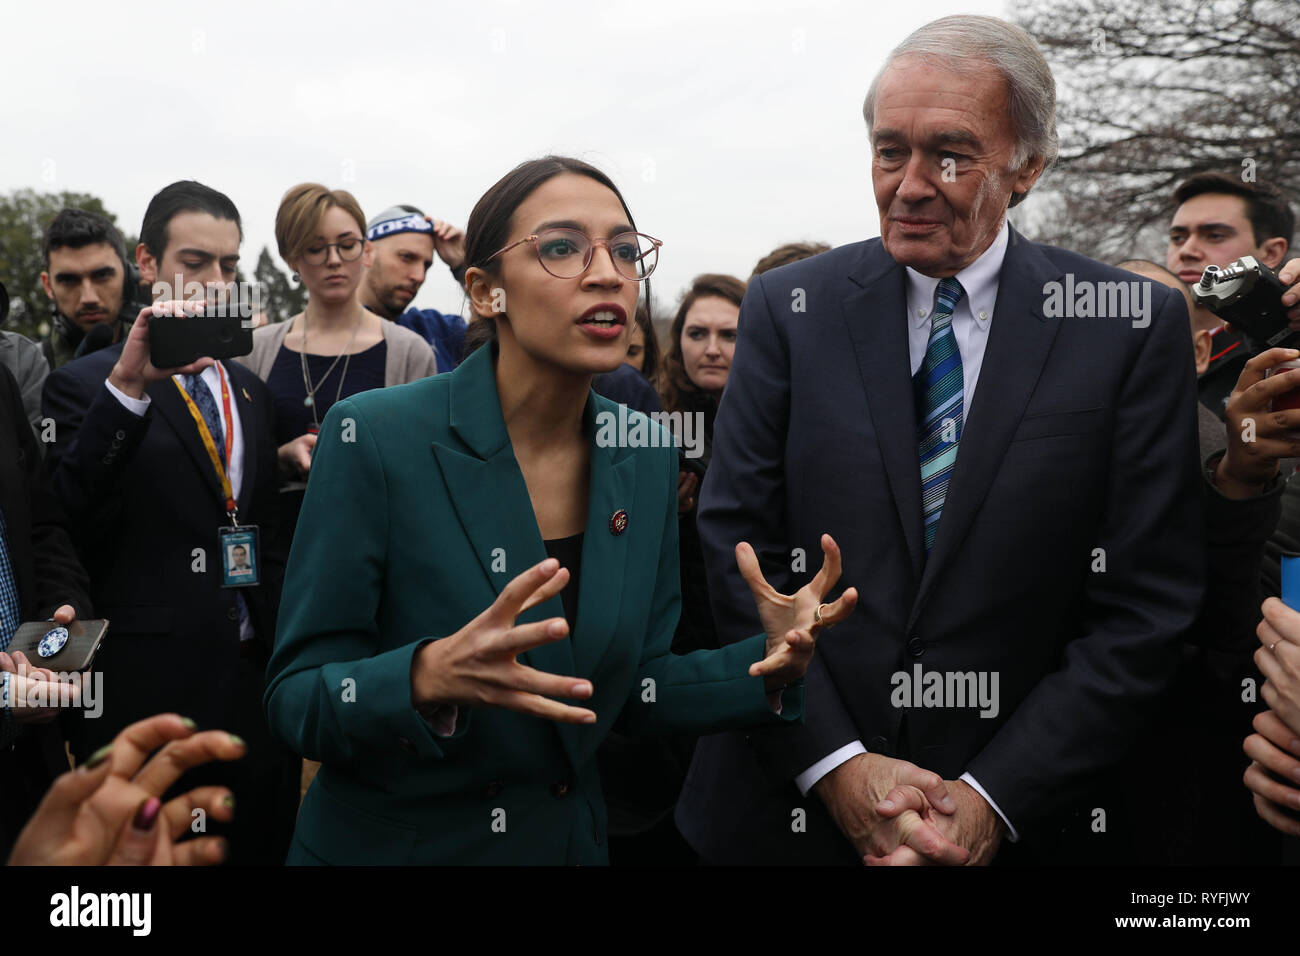 U.S. Rep. Alexandria Ocasio-Cortez, and Senator Ed Markey answers questions during the announcement for the Green New Deal legislation during a press conference outside the Capitol Building February 7, 2019 in Washington, D.C. Stock Photo